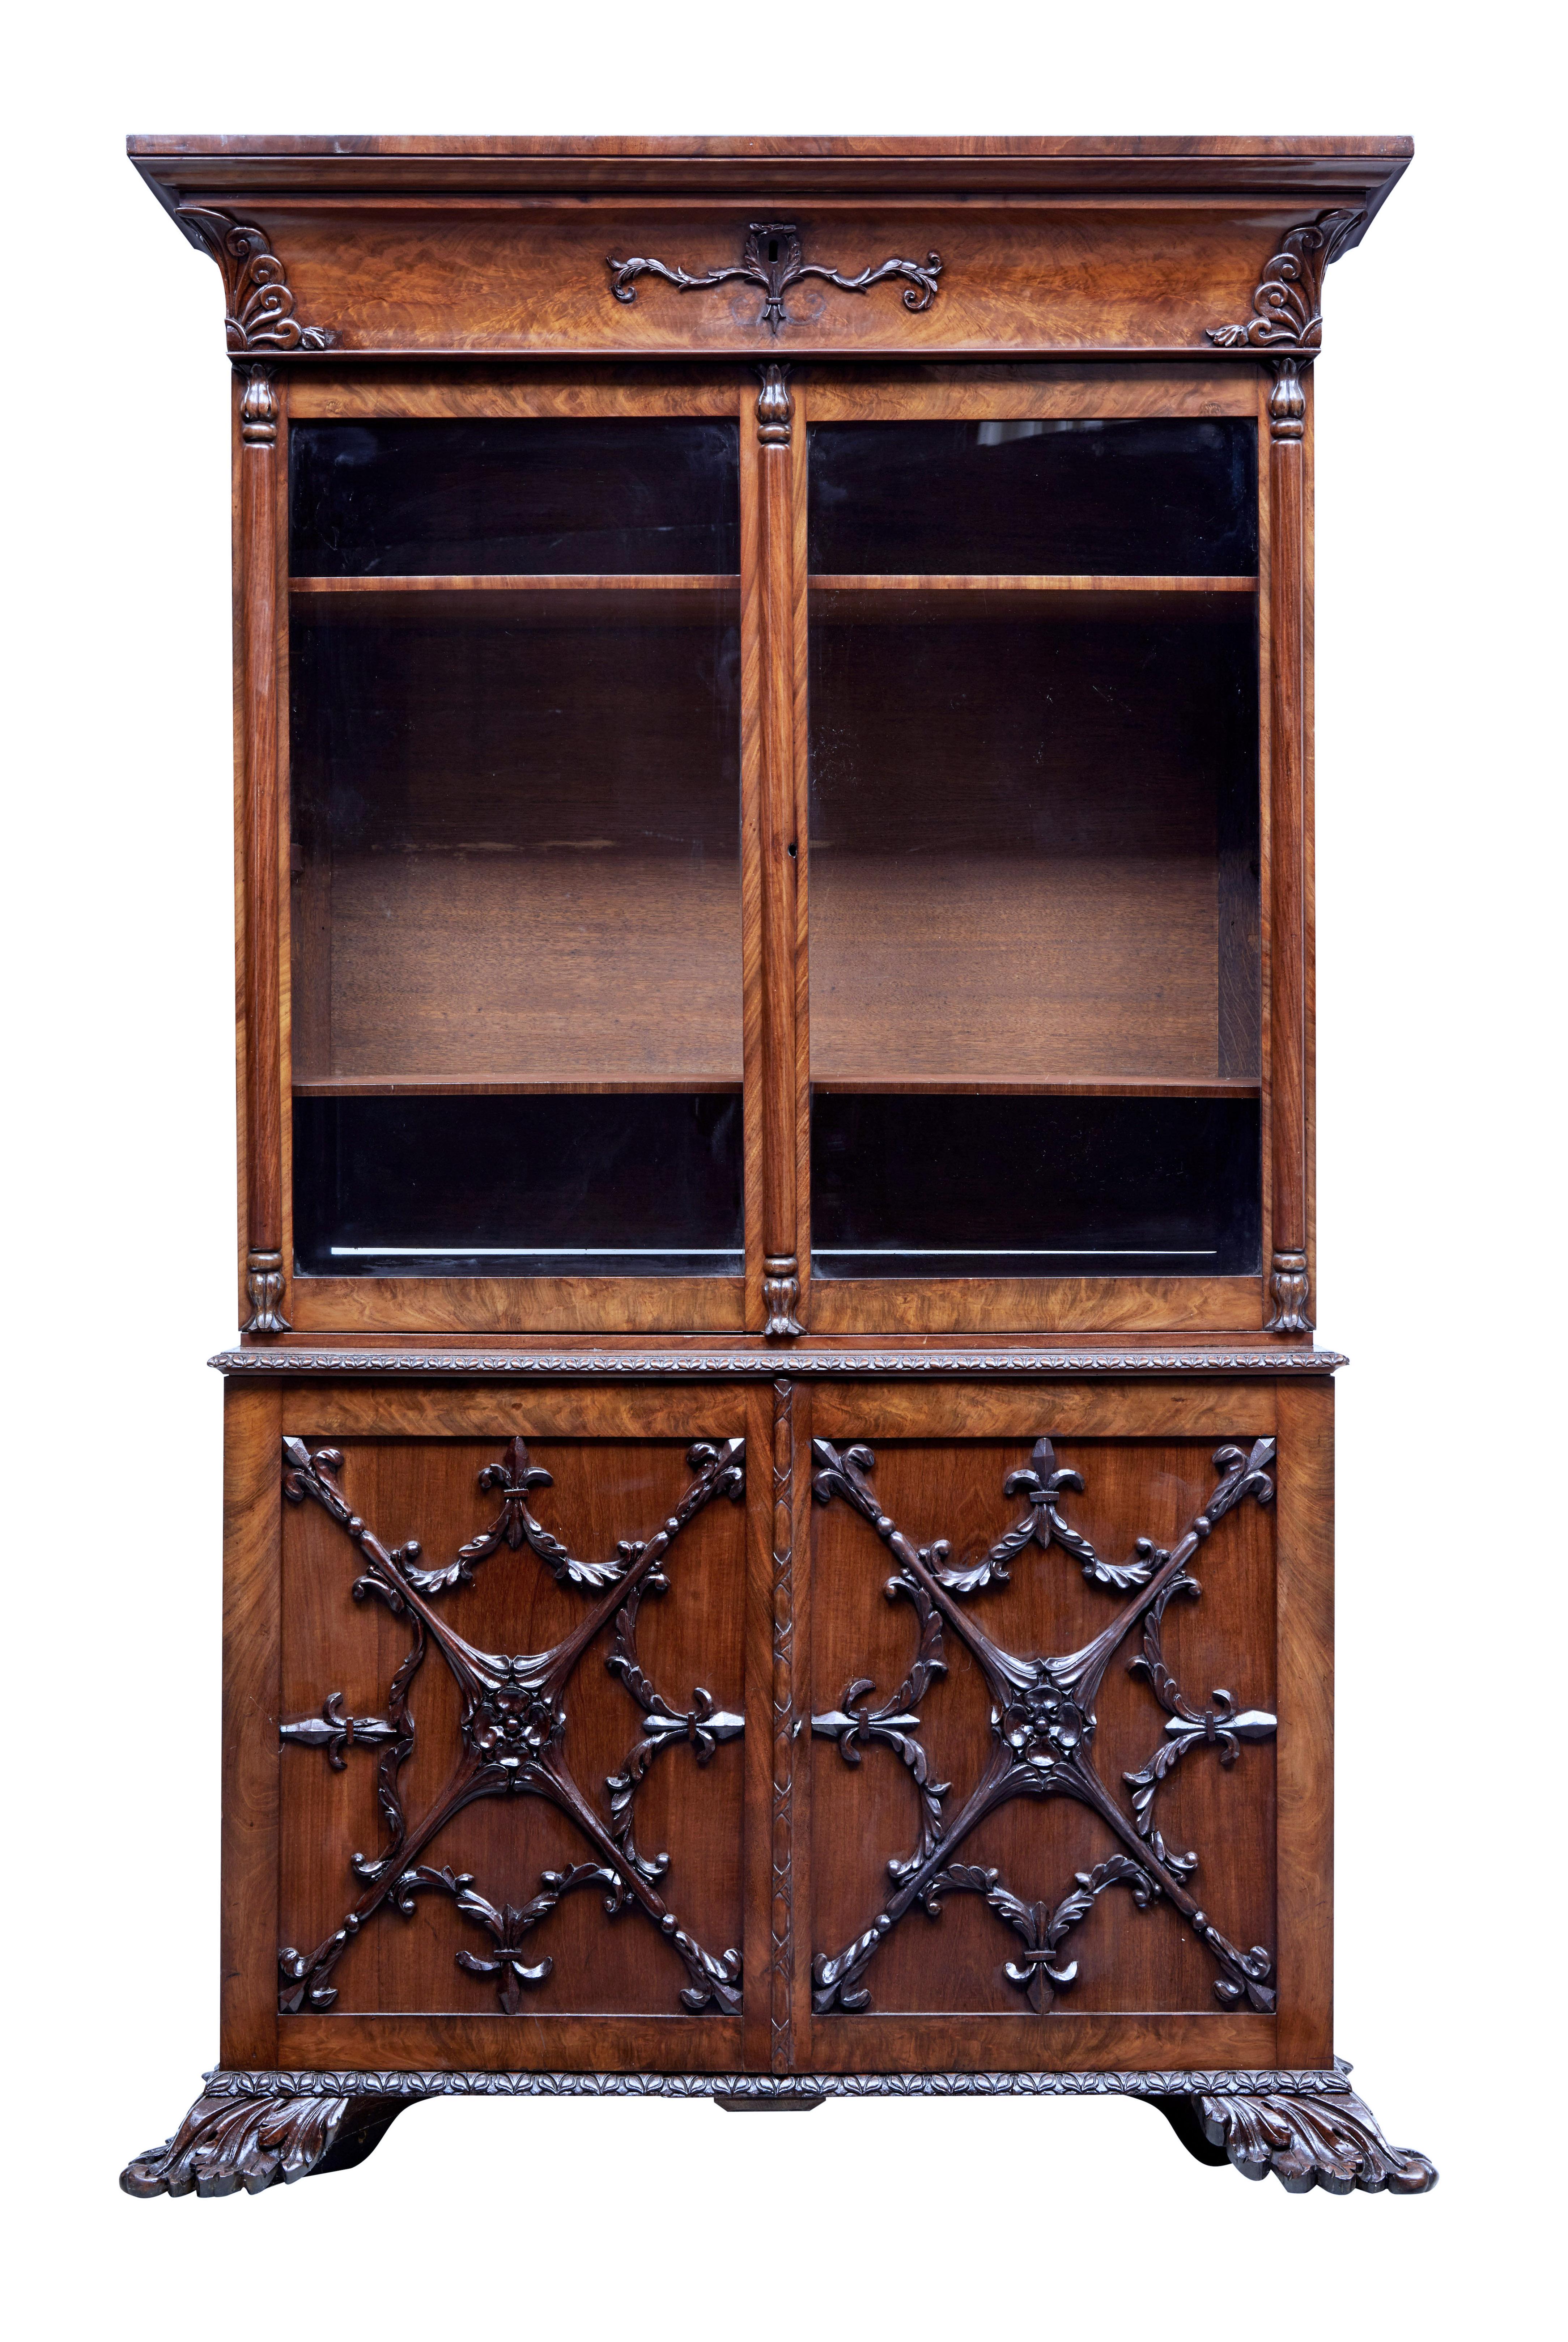 Rare danish carved mahogany bookcase circa 1840.

2 part bookcase.  Top section with hidden drawer below the cornice.  Applied carving to corners and around the key hole.  Double glazed doors open to 2 shelves with fixed height brackets for a